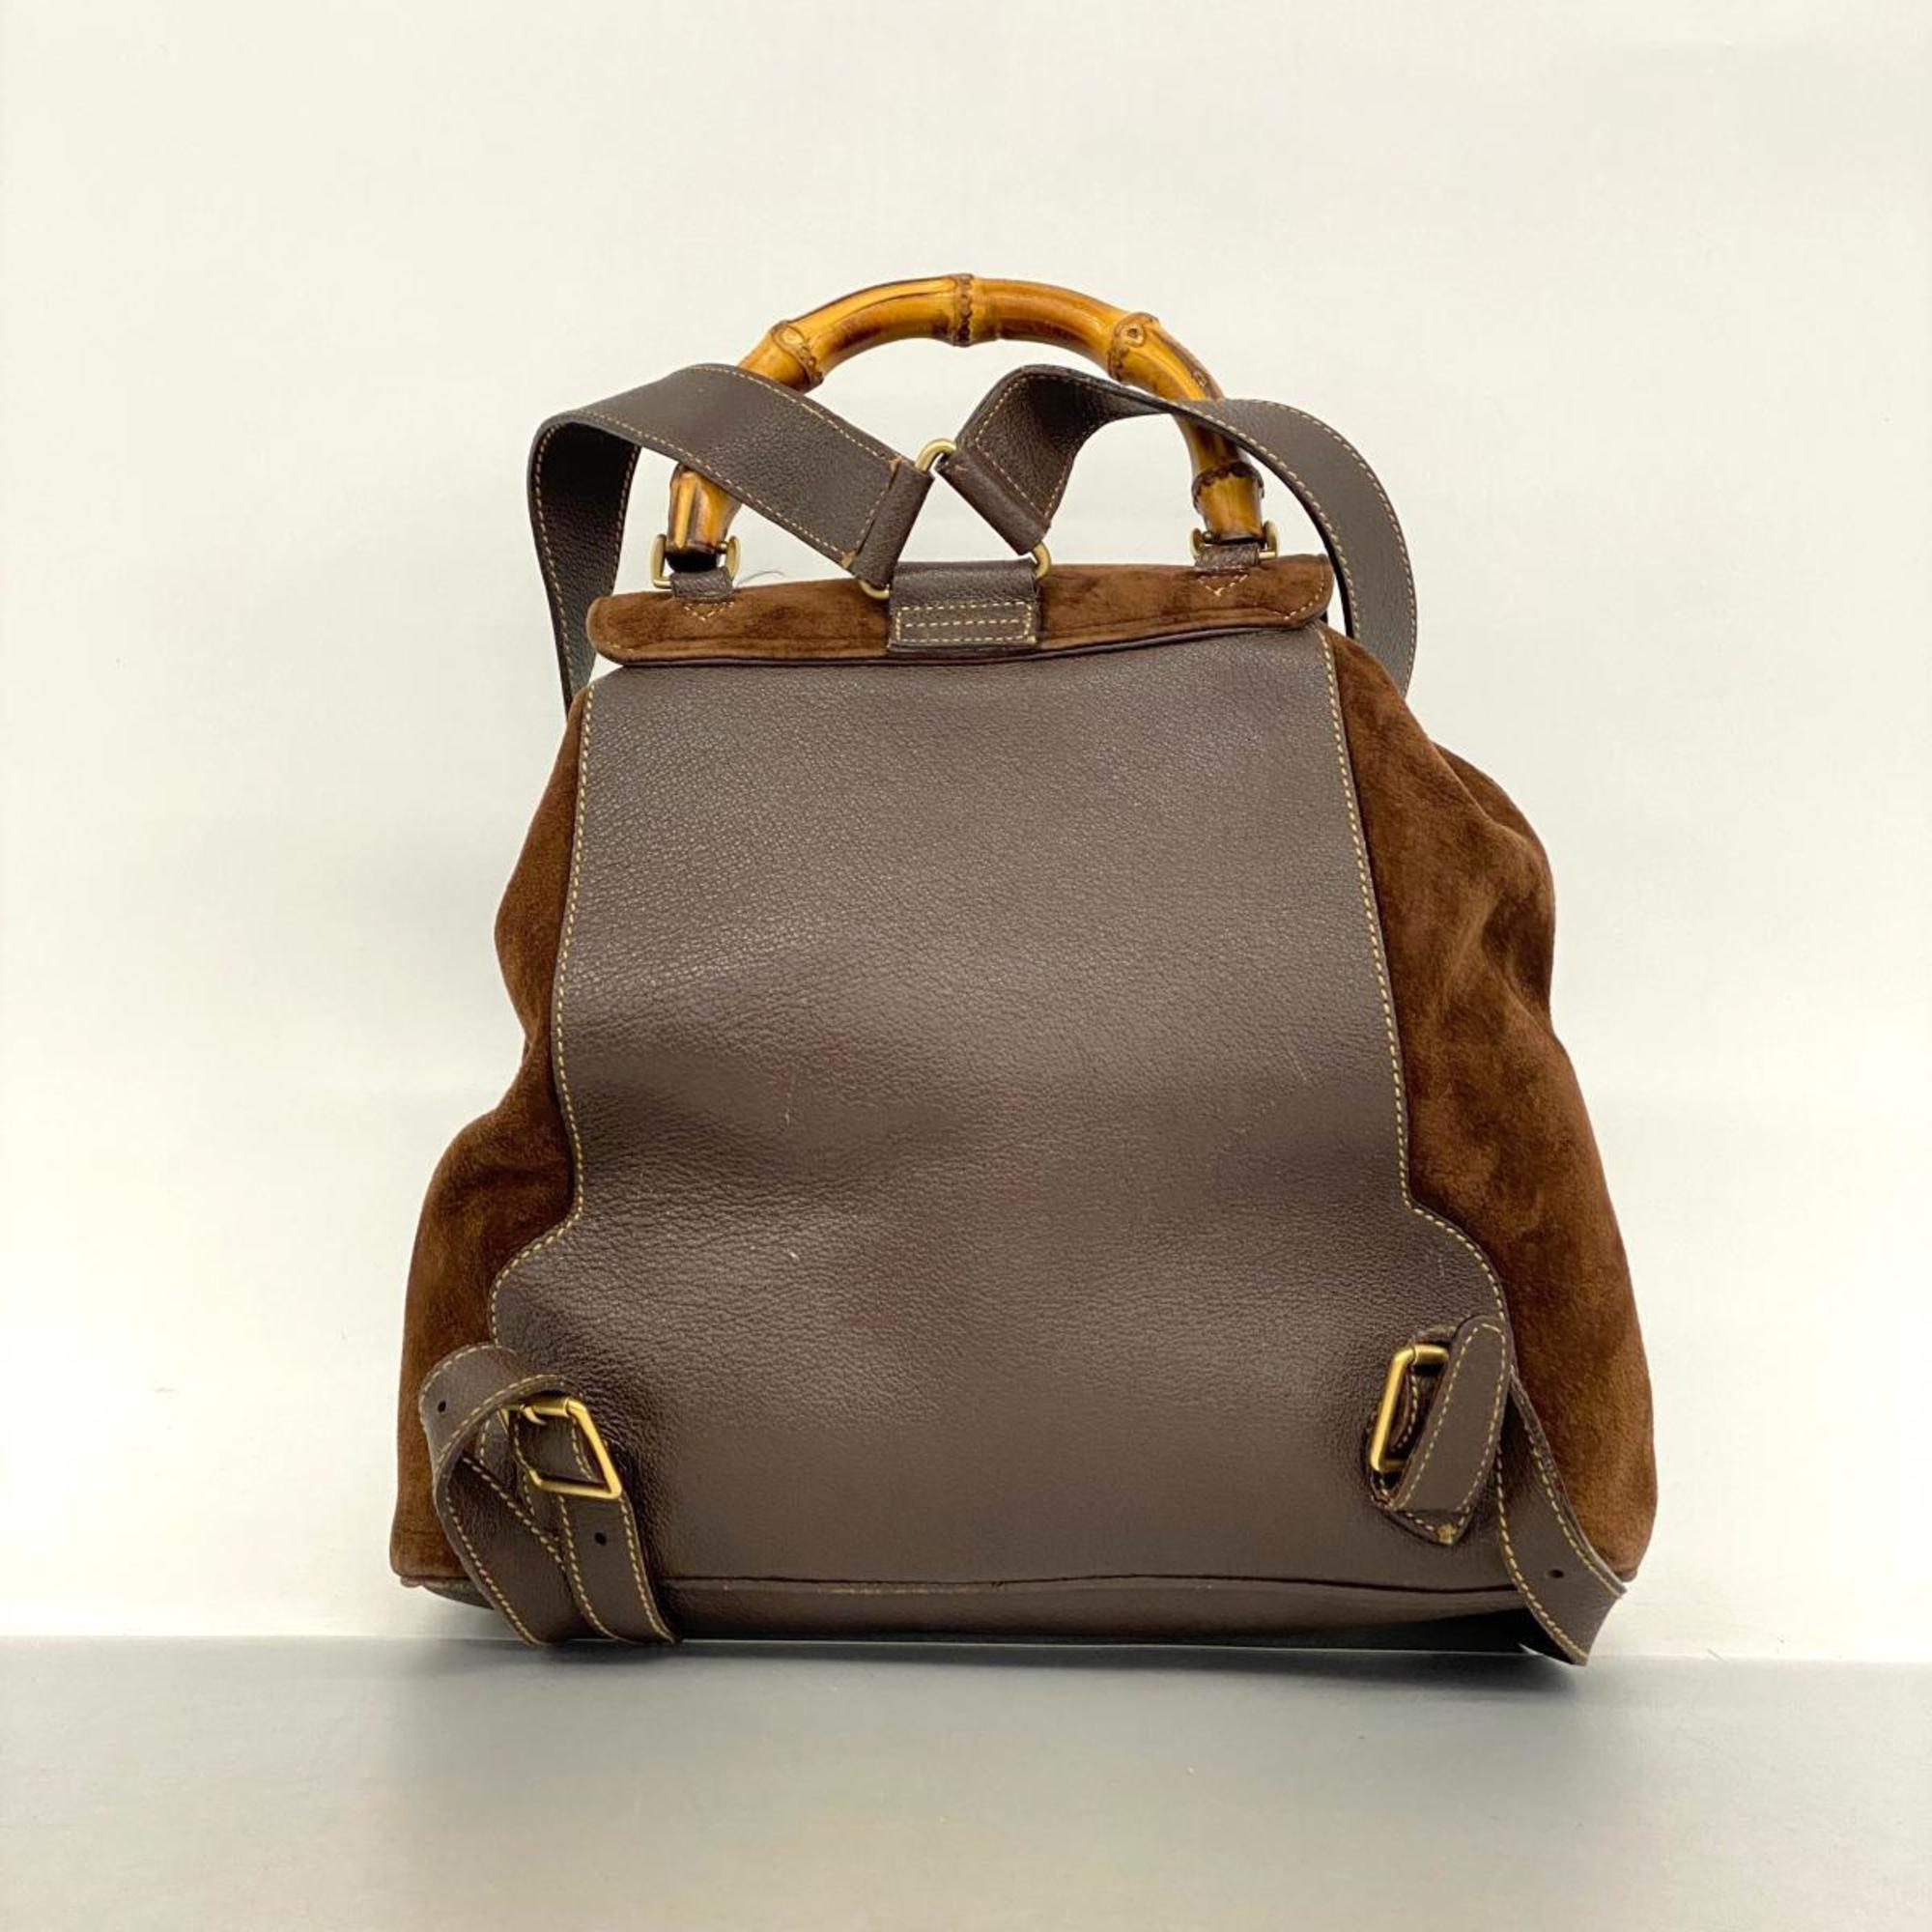 Gucci Backpack Bamboo 003 2058 0016 Suede Leather Brown Champagne Women's